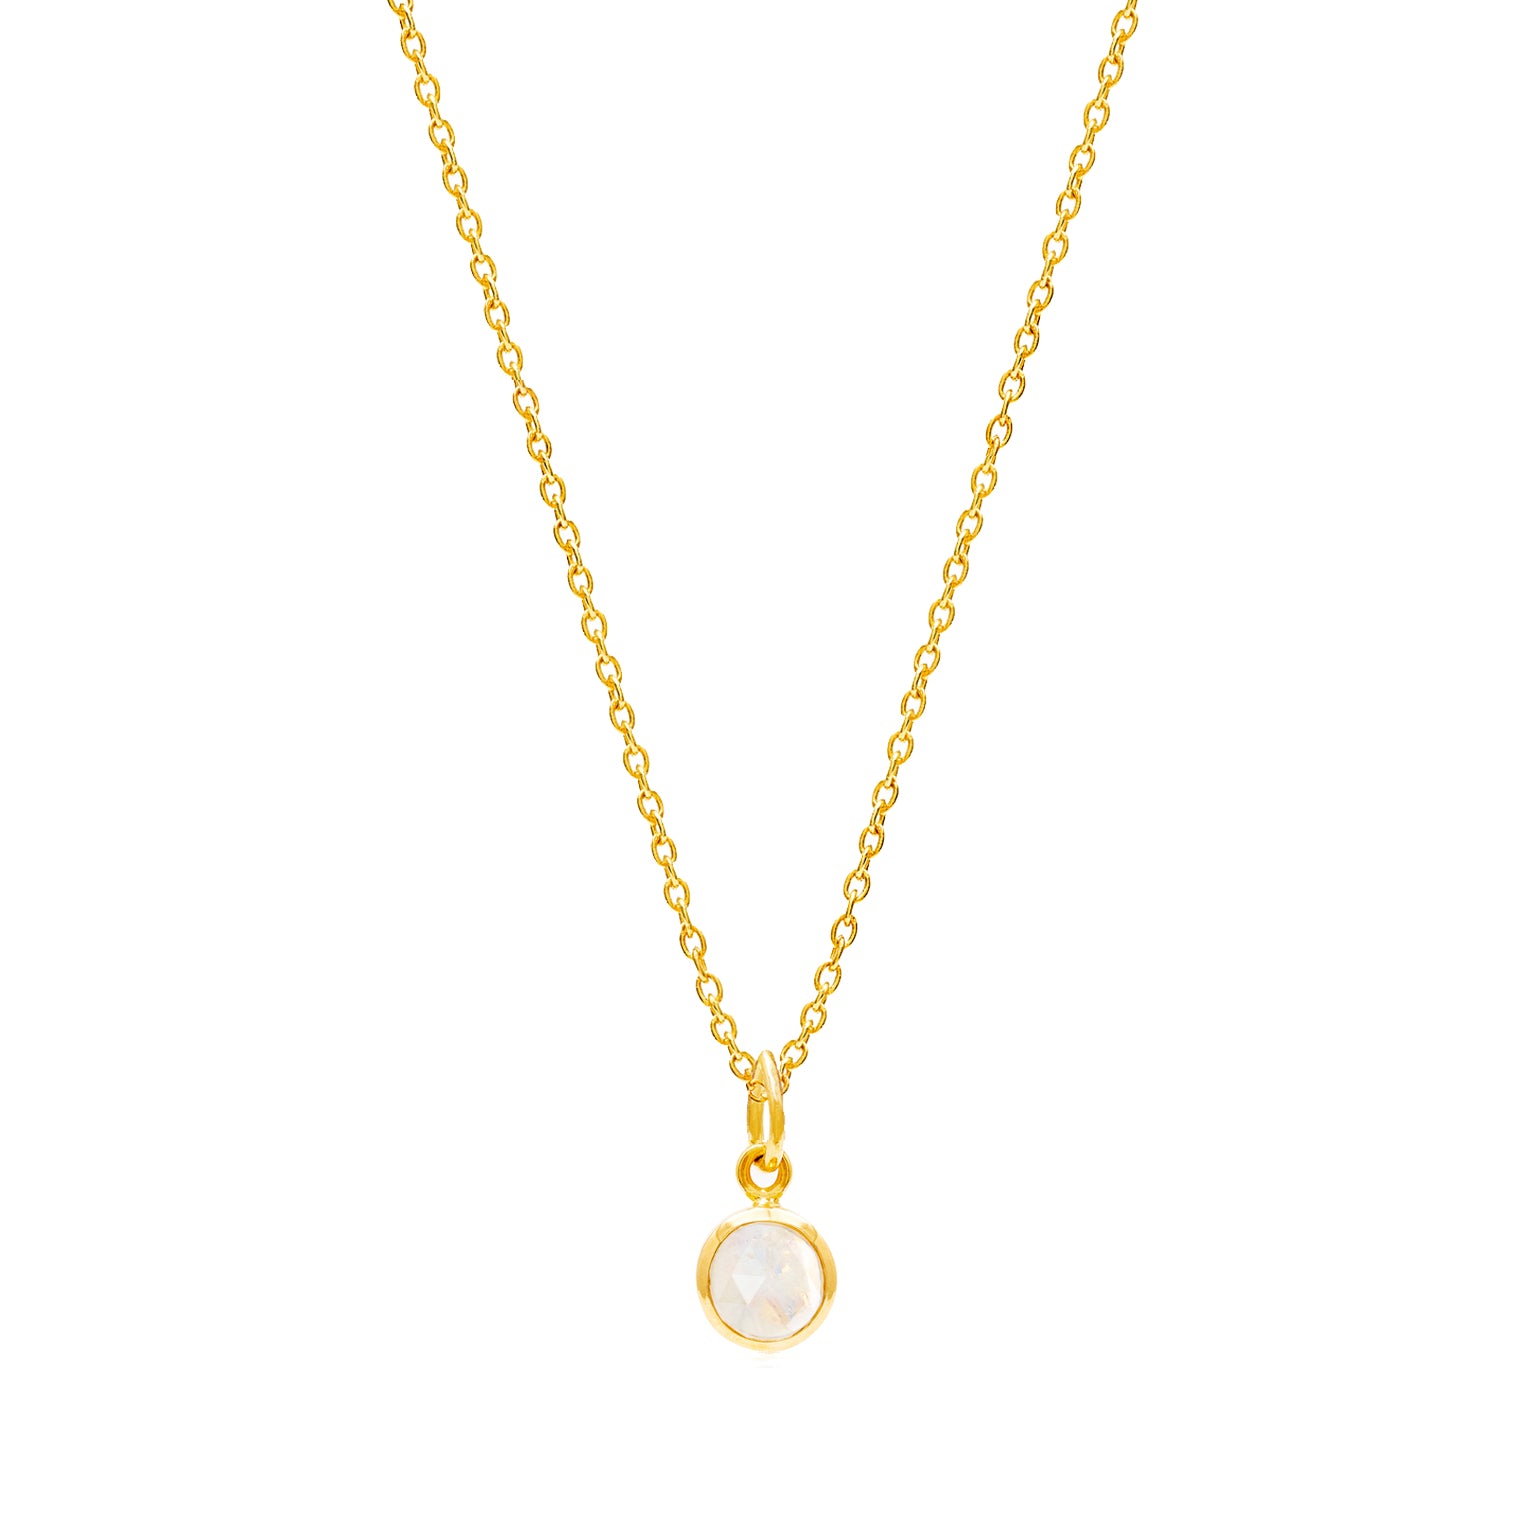 Gold Birthstone Necklace with Moonstone (October) - Lulu B Jewellery